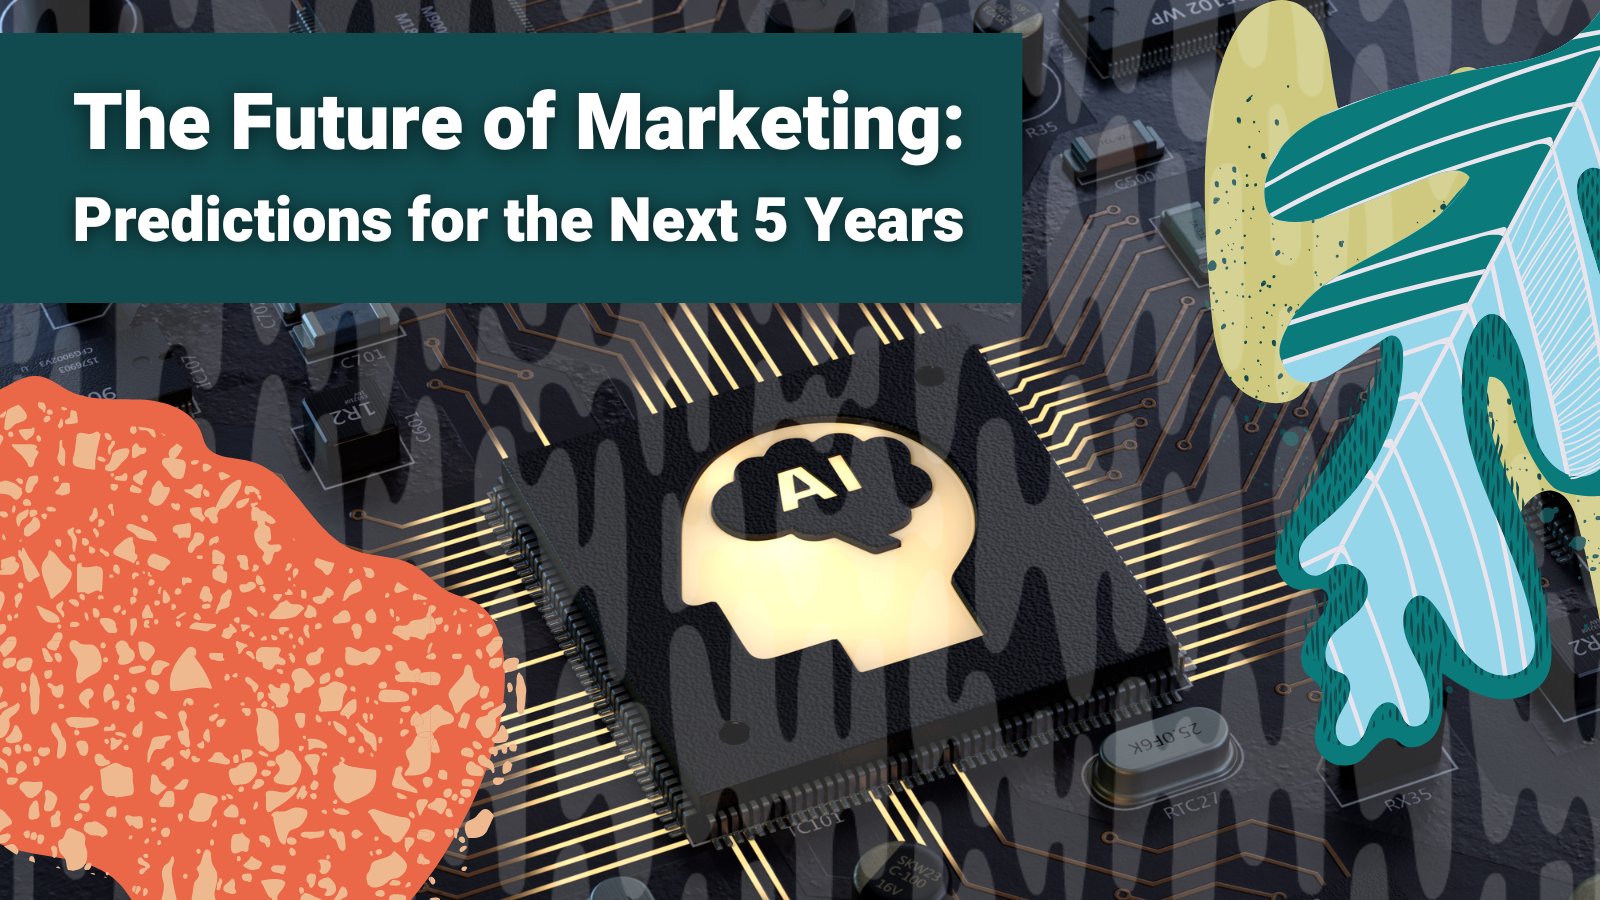 Cartoon thinking Icon, text over it reads: The future of marketing: prediction of marketing for the next 5 years